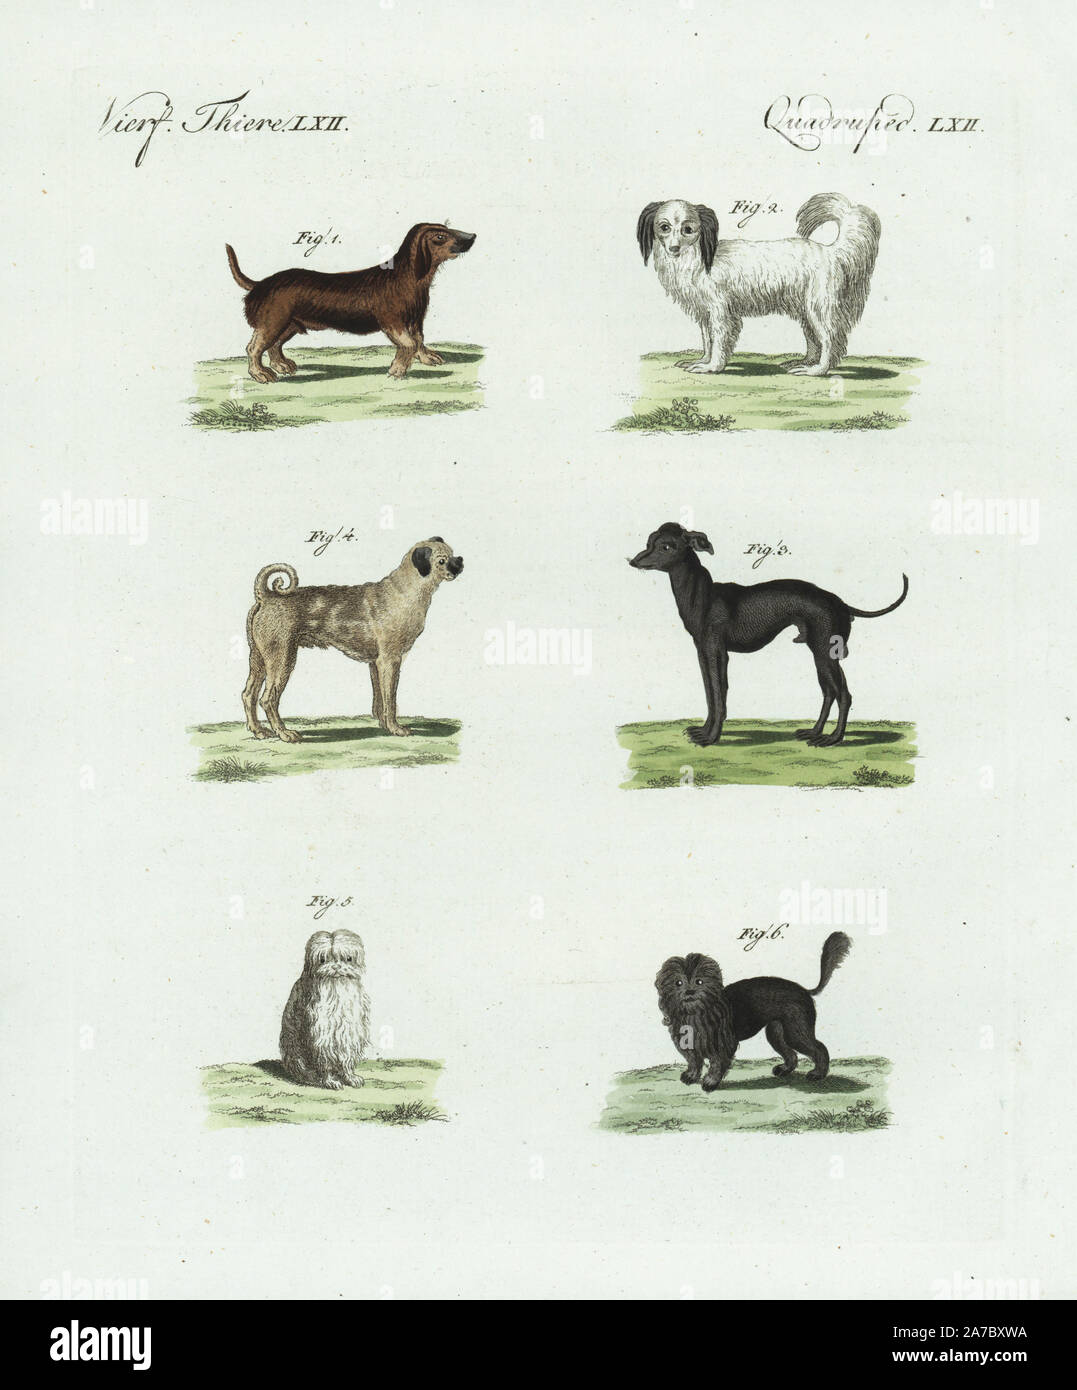 Dachshund 1, Braque pointer 2, Anatolian shepherd dog 3, Doguin of Bordeaux 4, Maltese dog 5, and lion dog or chow chow 6. Handcoloured copperplate engraving from Bertuch's 'Bilderbuch fur Kinder' (Picture Book for Children), Weimar, 1798. Friedrich Johann Bertuch (1747-1822) was a German publisher and man of arts most famous for his 12-volume encyclopedia for children illustrated with 1,200 engraved plates on natural history, science, costume, mythology, etc., published from 1790-1830. Stock Photo